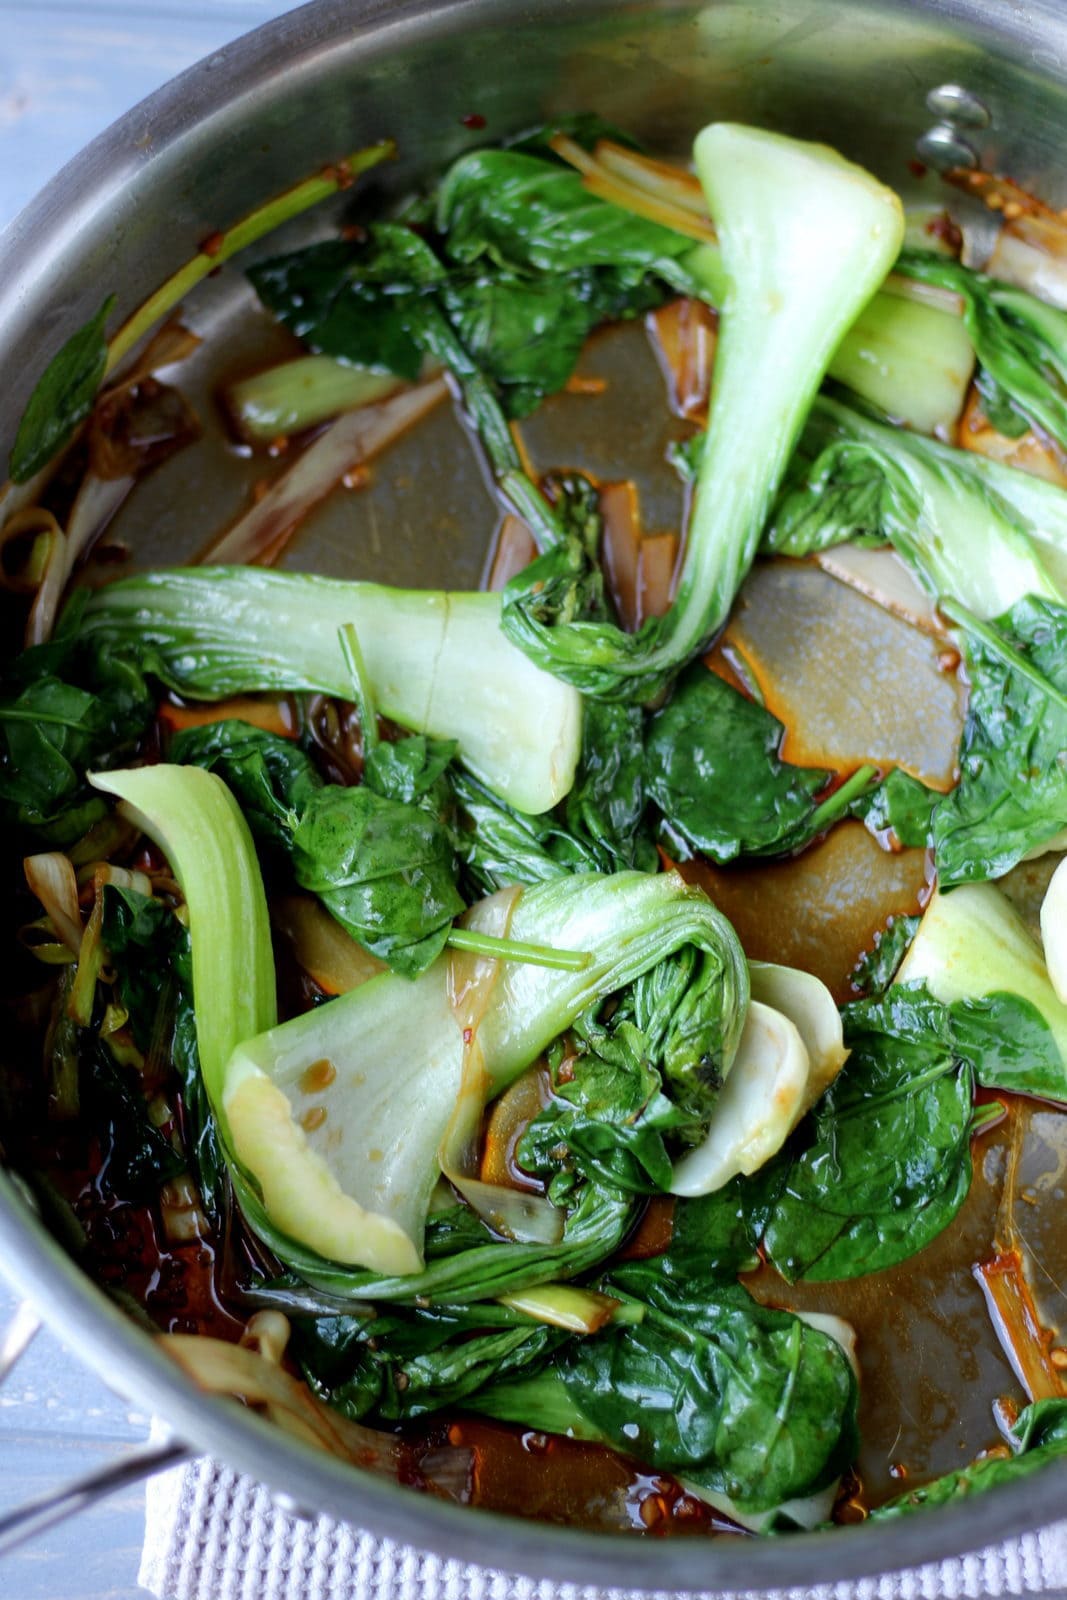 Braised baby bock choy, leeks and spinach